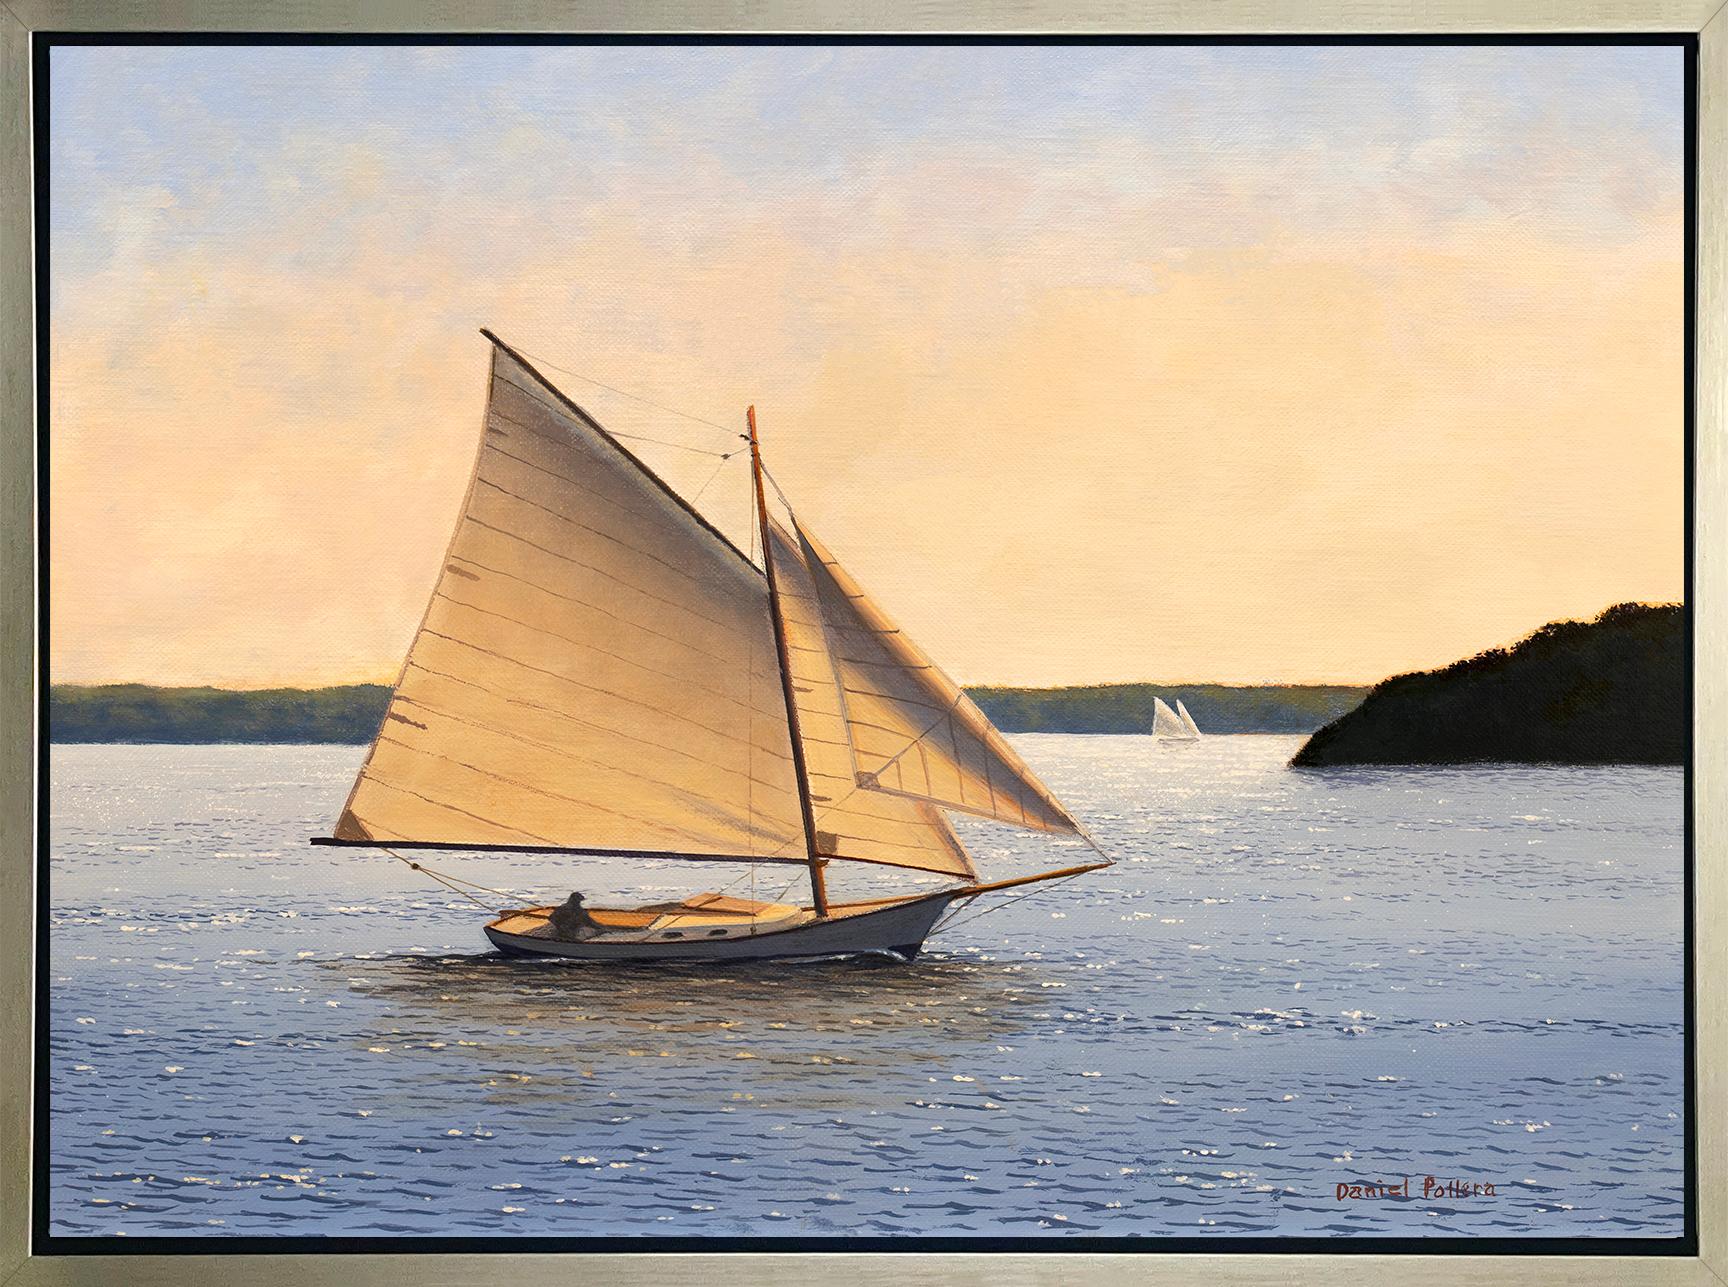 Daniel Pollera Landscape Print – ""Sailing Out to Sea", gerahmter Giclee-Druck in limitierter Auflage, 12 Zoll x 16 Zoll